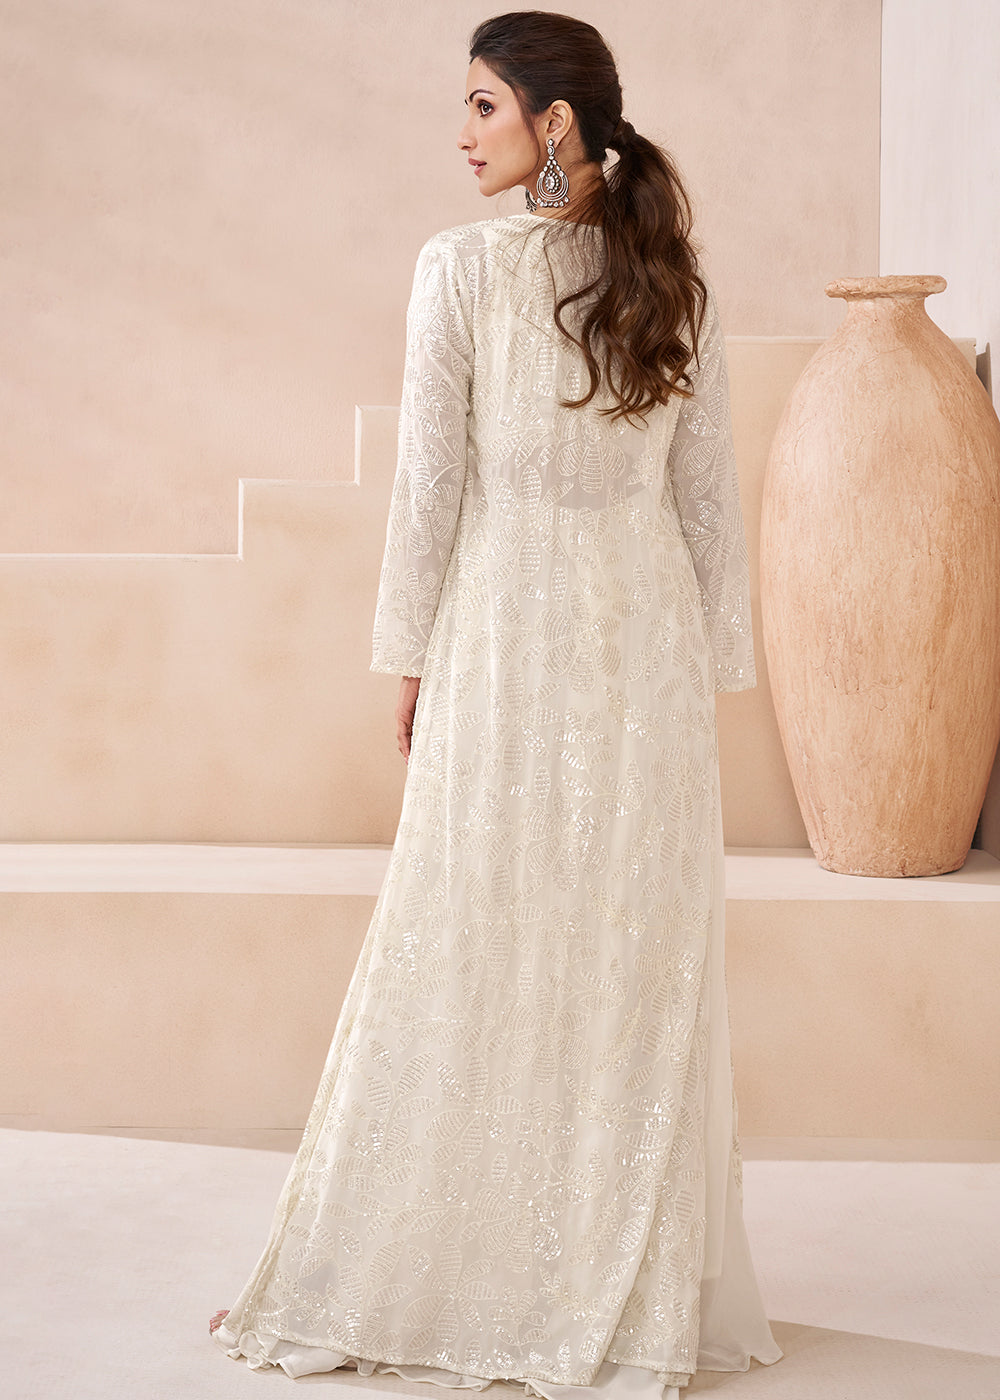 Buy Now Real Georgette White Indo Western Palazzo Suit Online in USA, UK, Canada, Germany, Australia & Worldwide at Empress Clothing. 